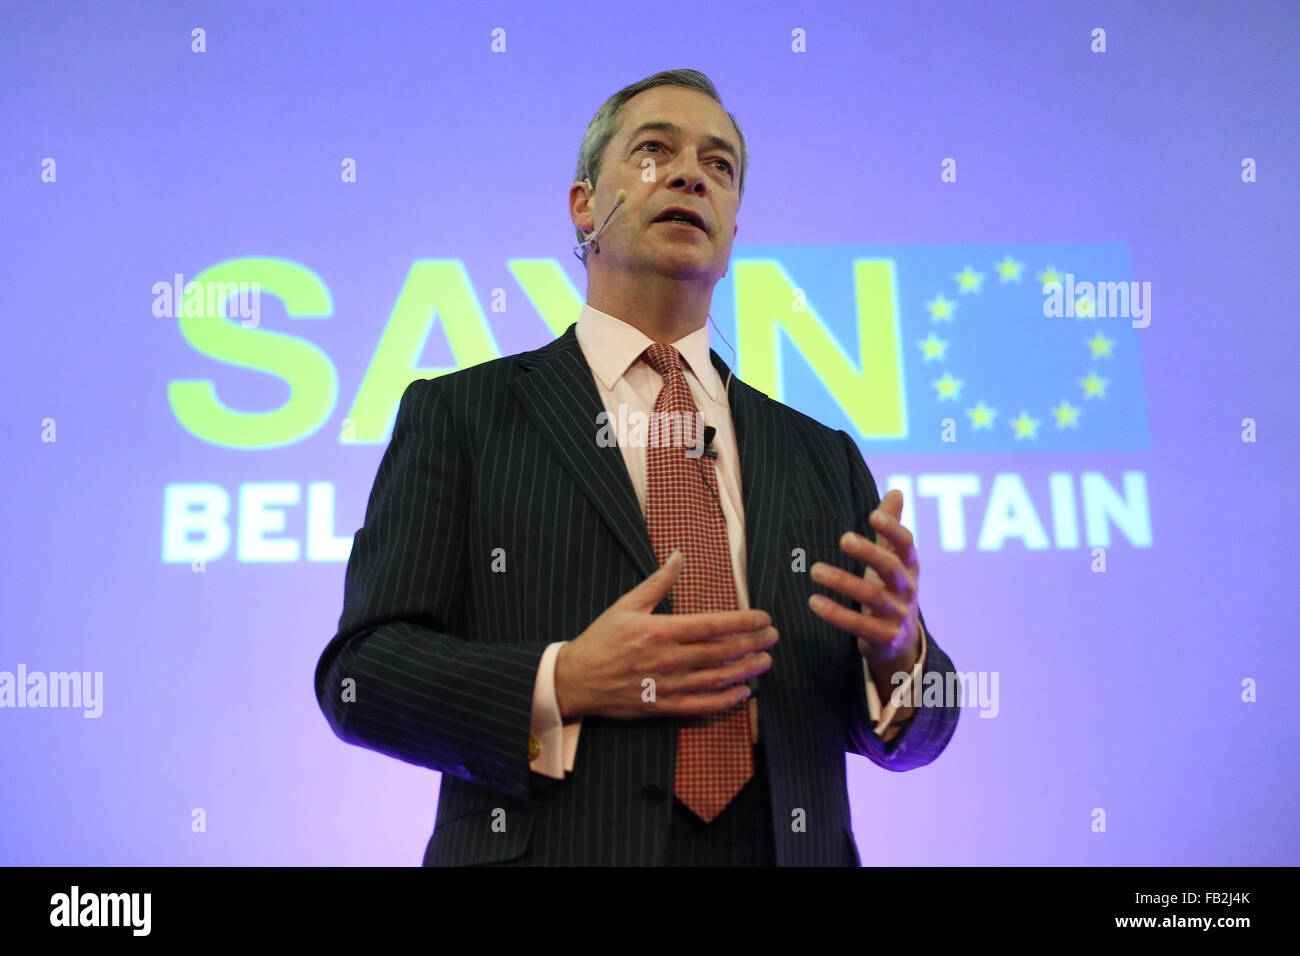 UKIP leader Nigel Farage speaks at a 'Say No to the EU' event at Elland Road in Leeds, West Yorkshire, UK. 30th November 2015. Stock Photo